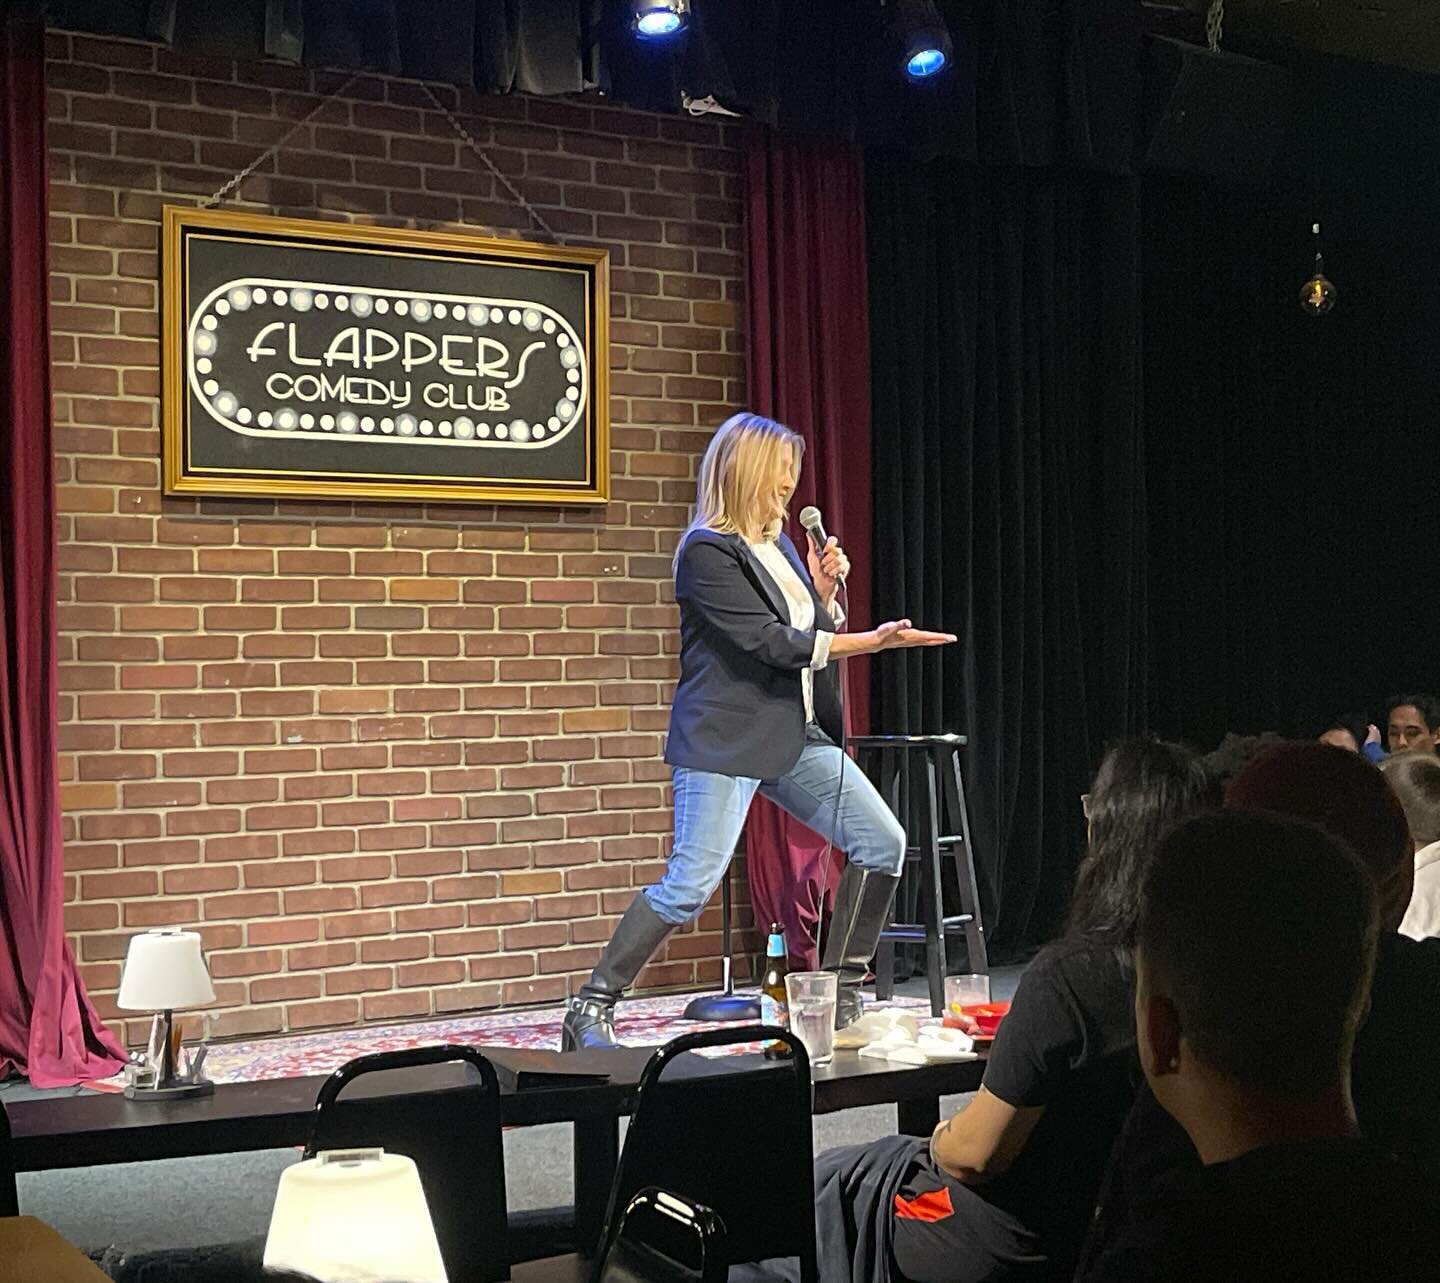 I call this joke on a platter.  @flapperscomedy